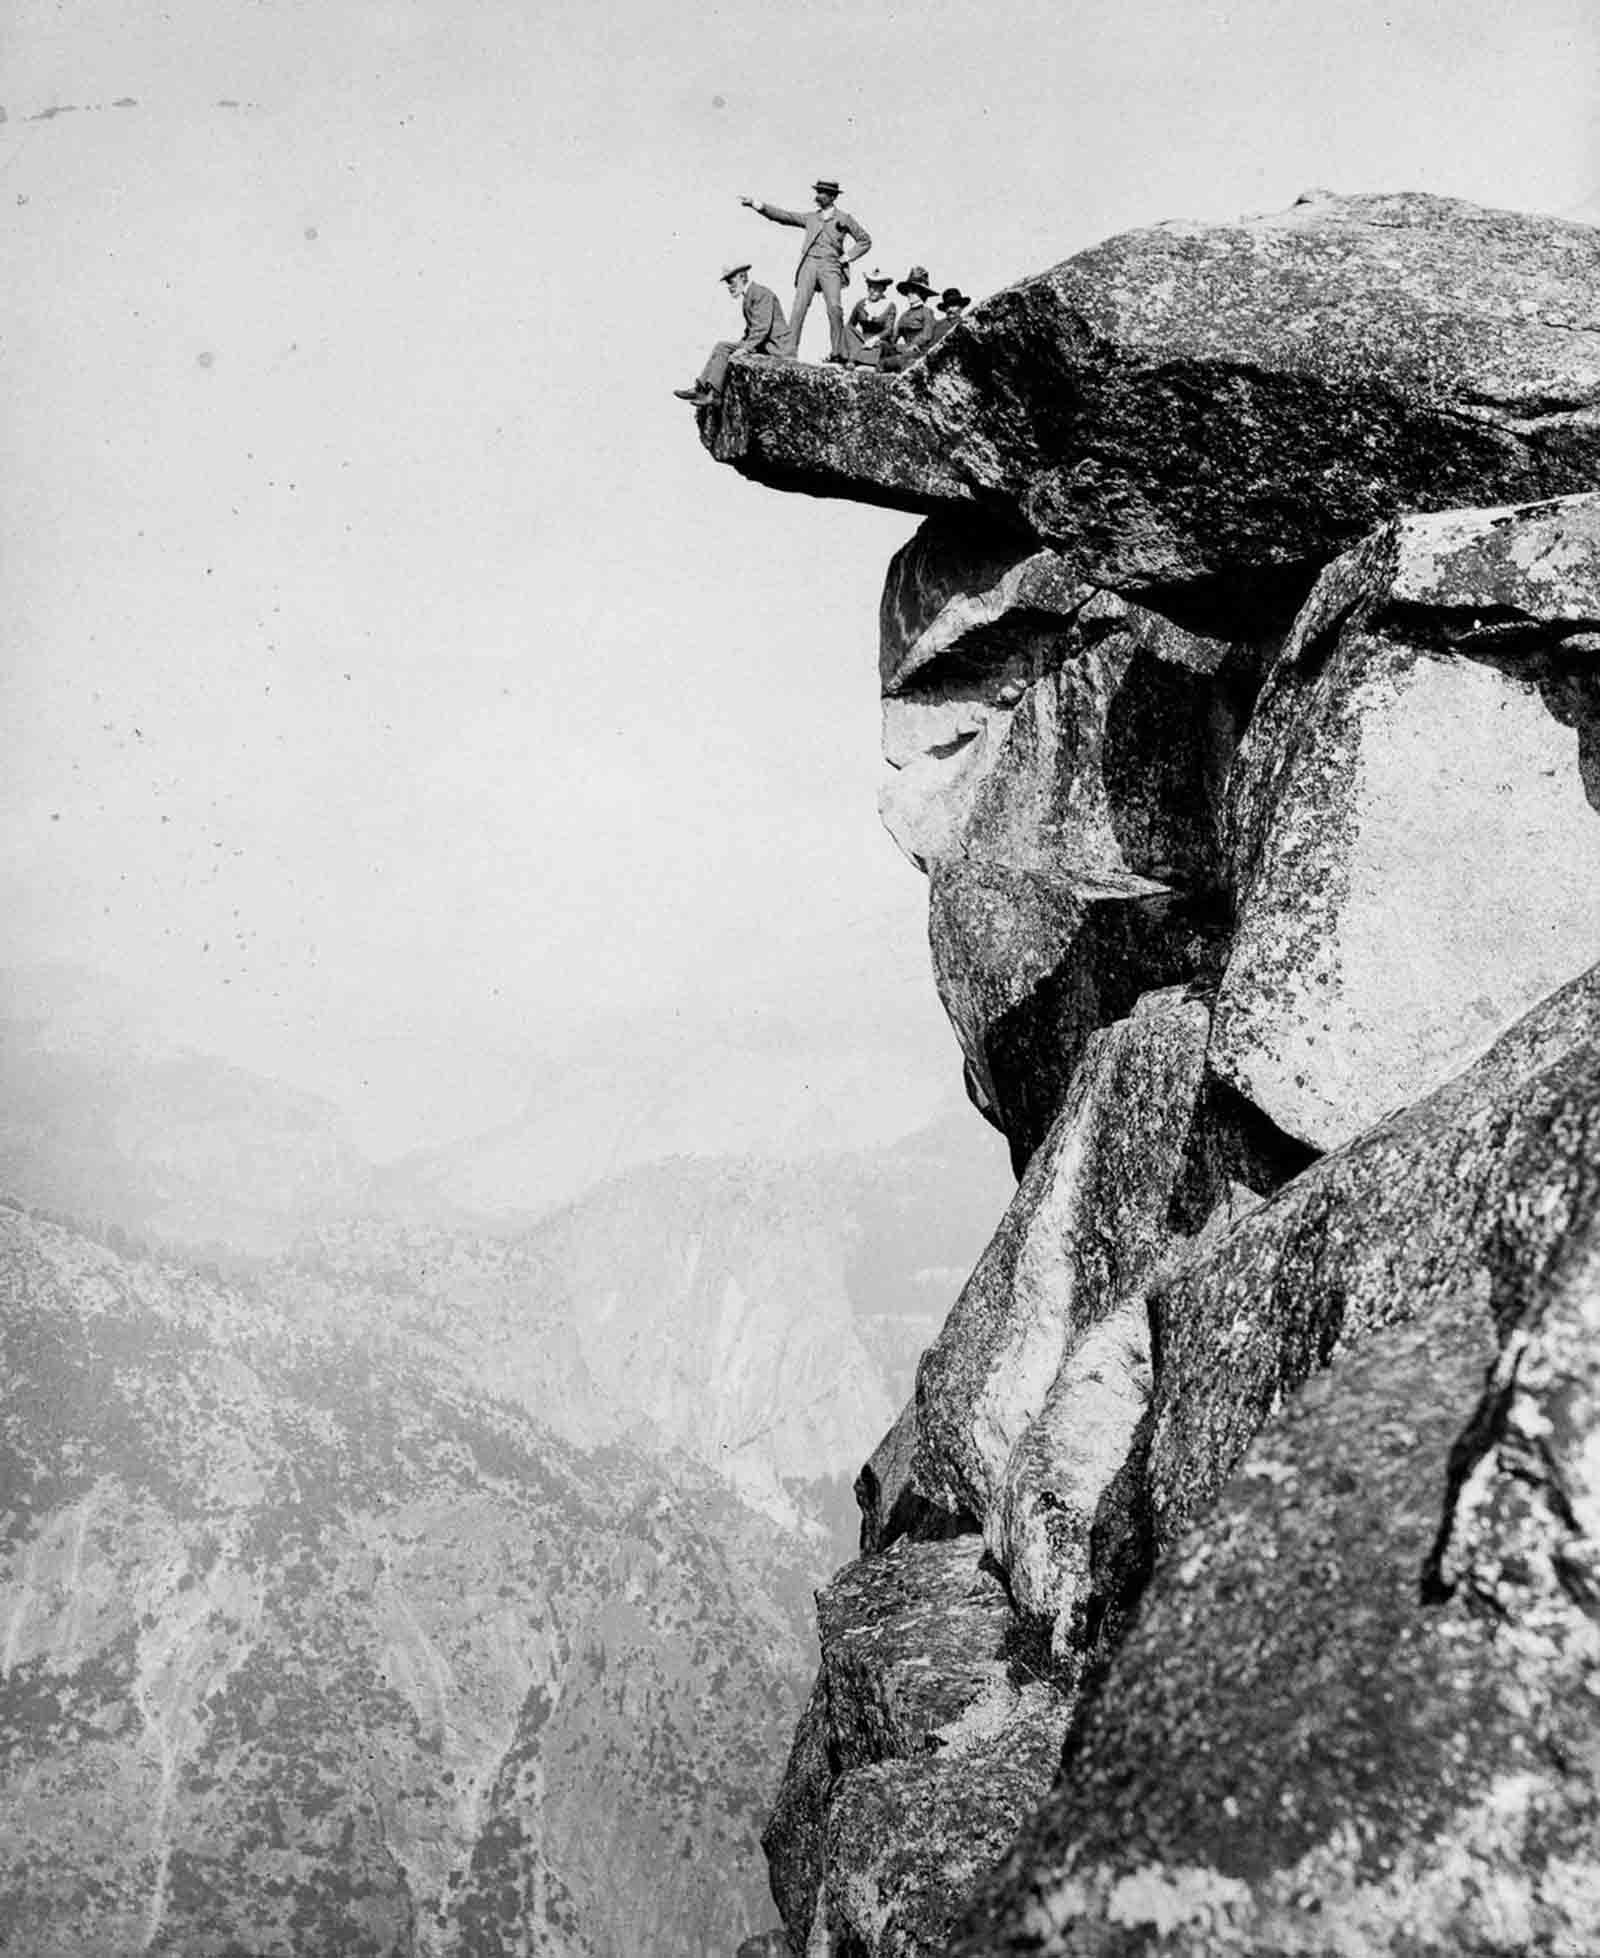 Tourists pose on Glacier Point above the Yosemite Valley, 1887.